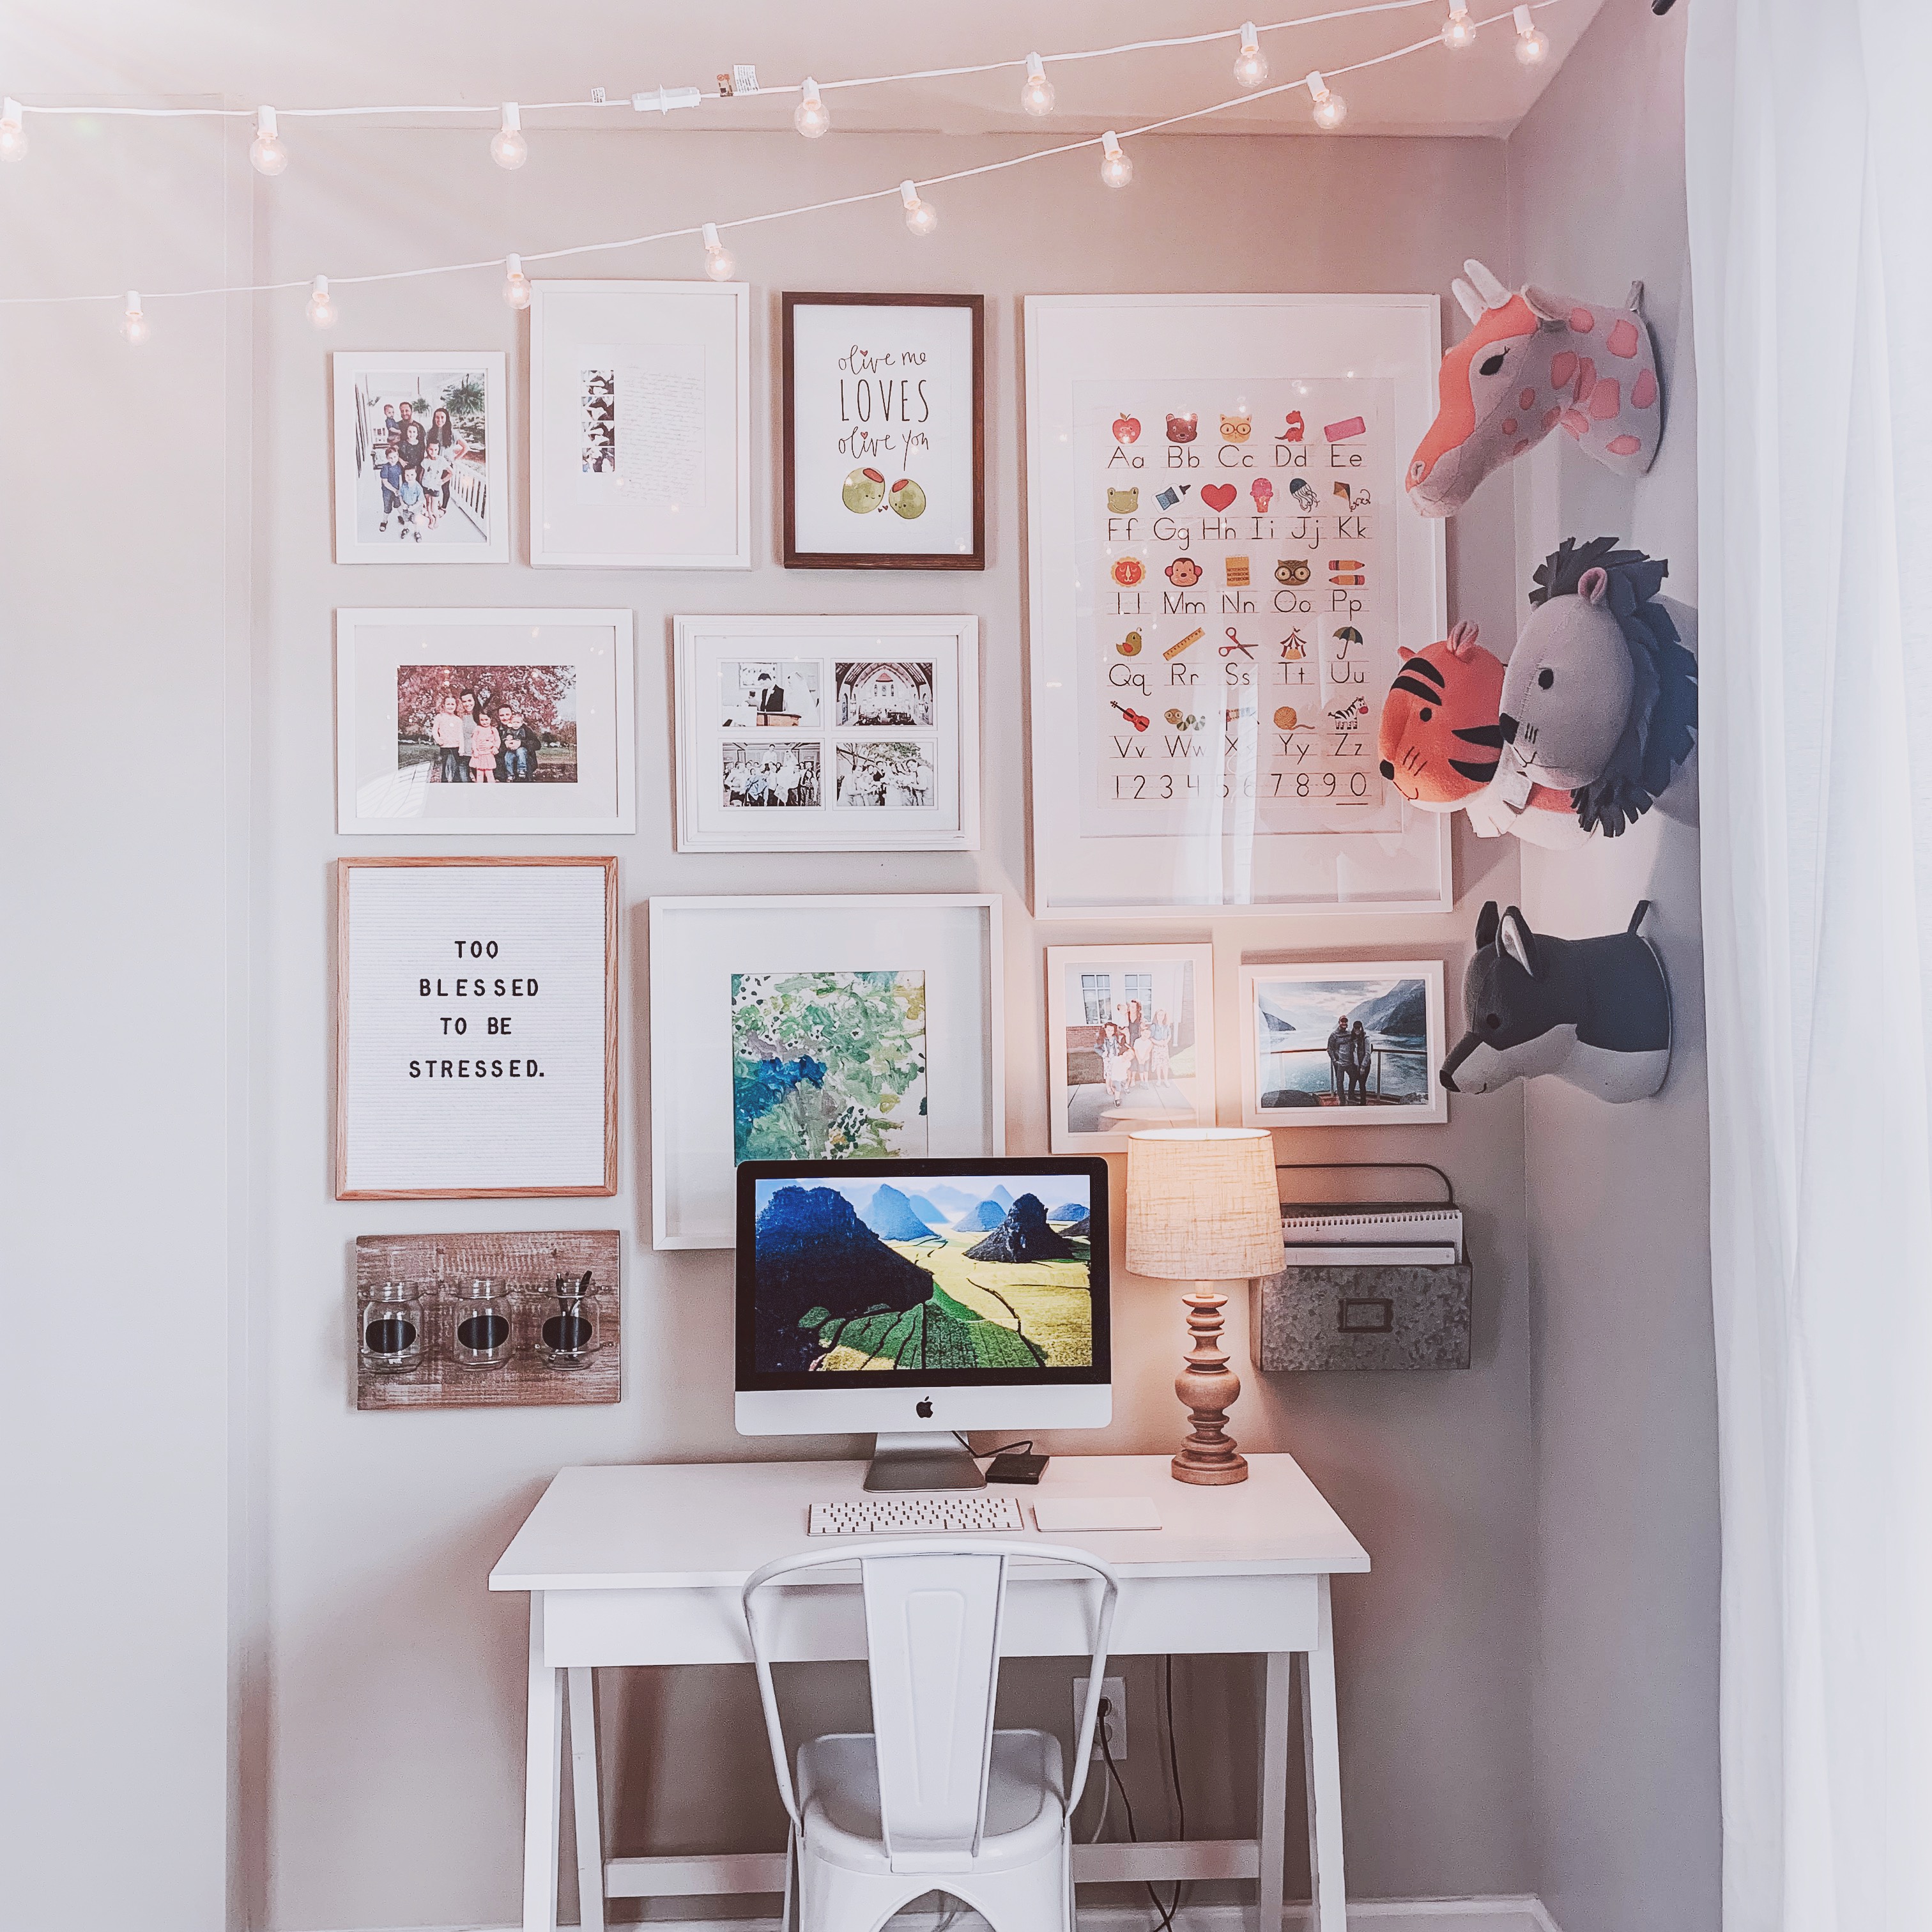 Room Tour: Our Playroom + Corner Office – At Home With Natalie